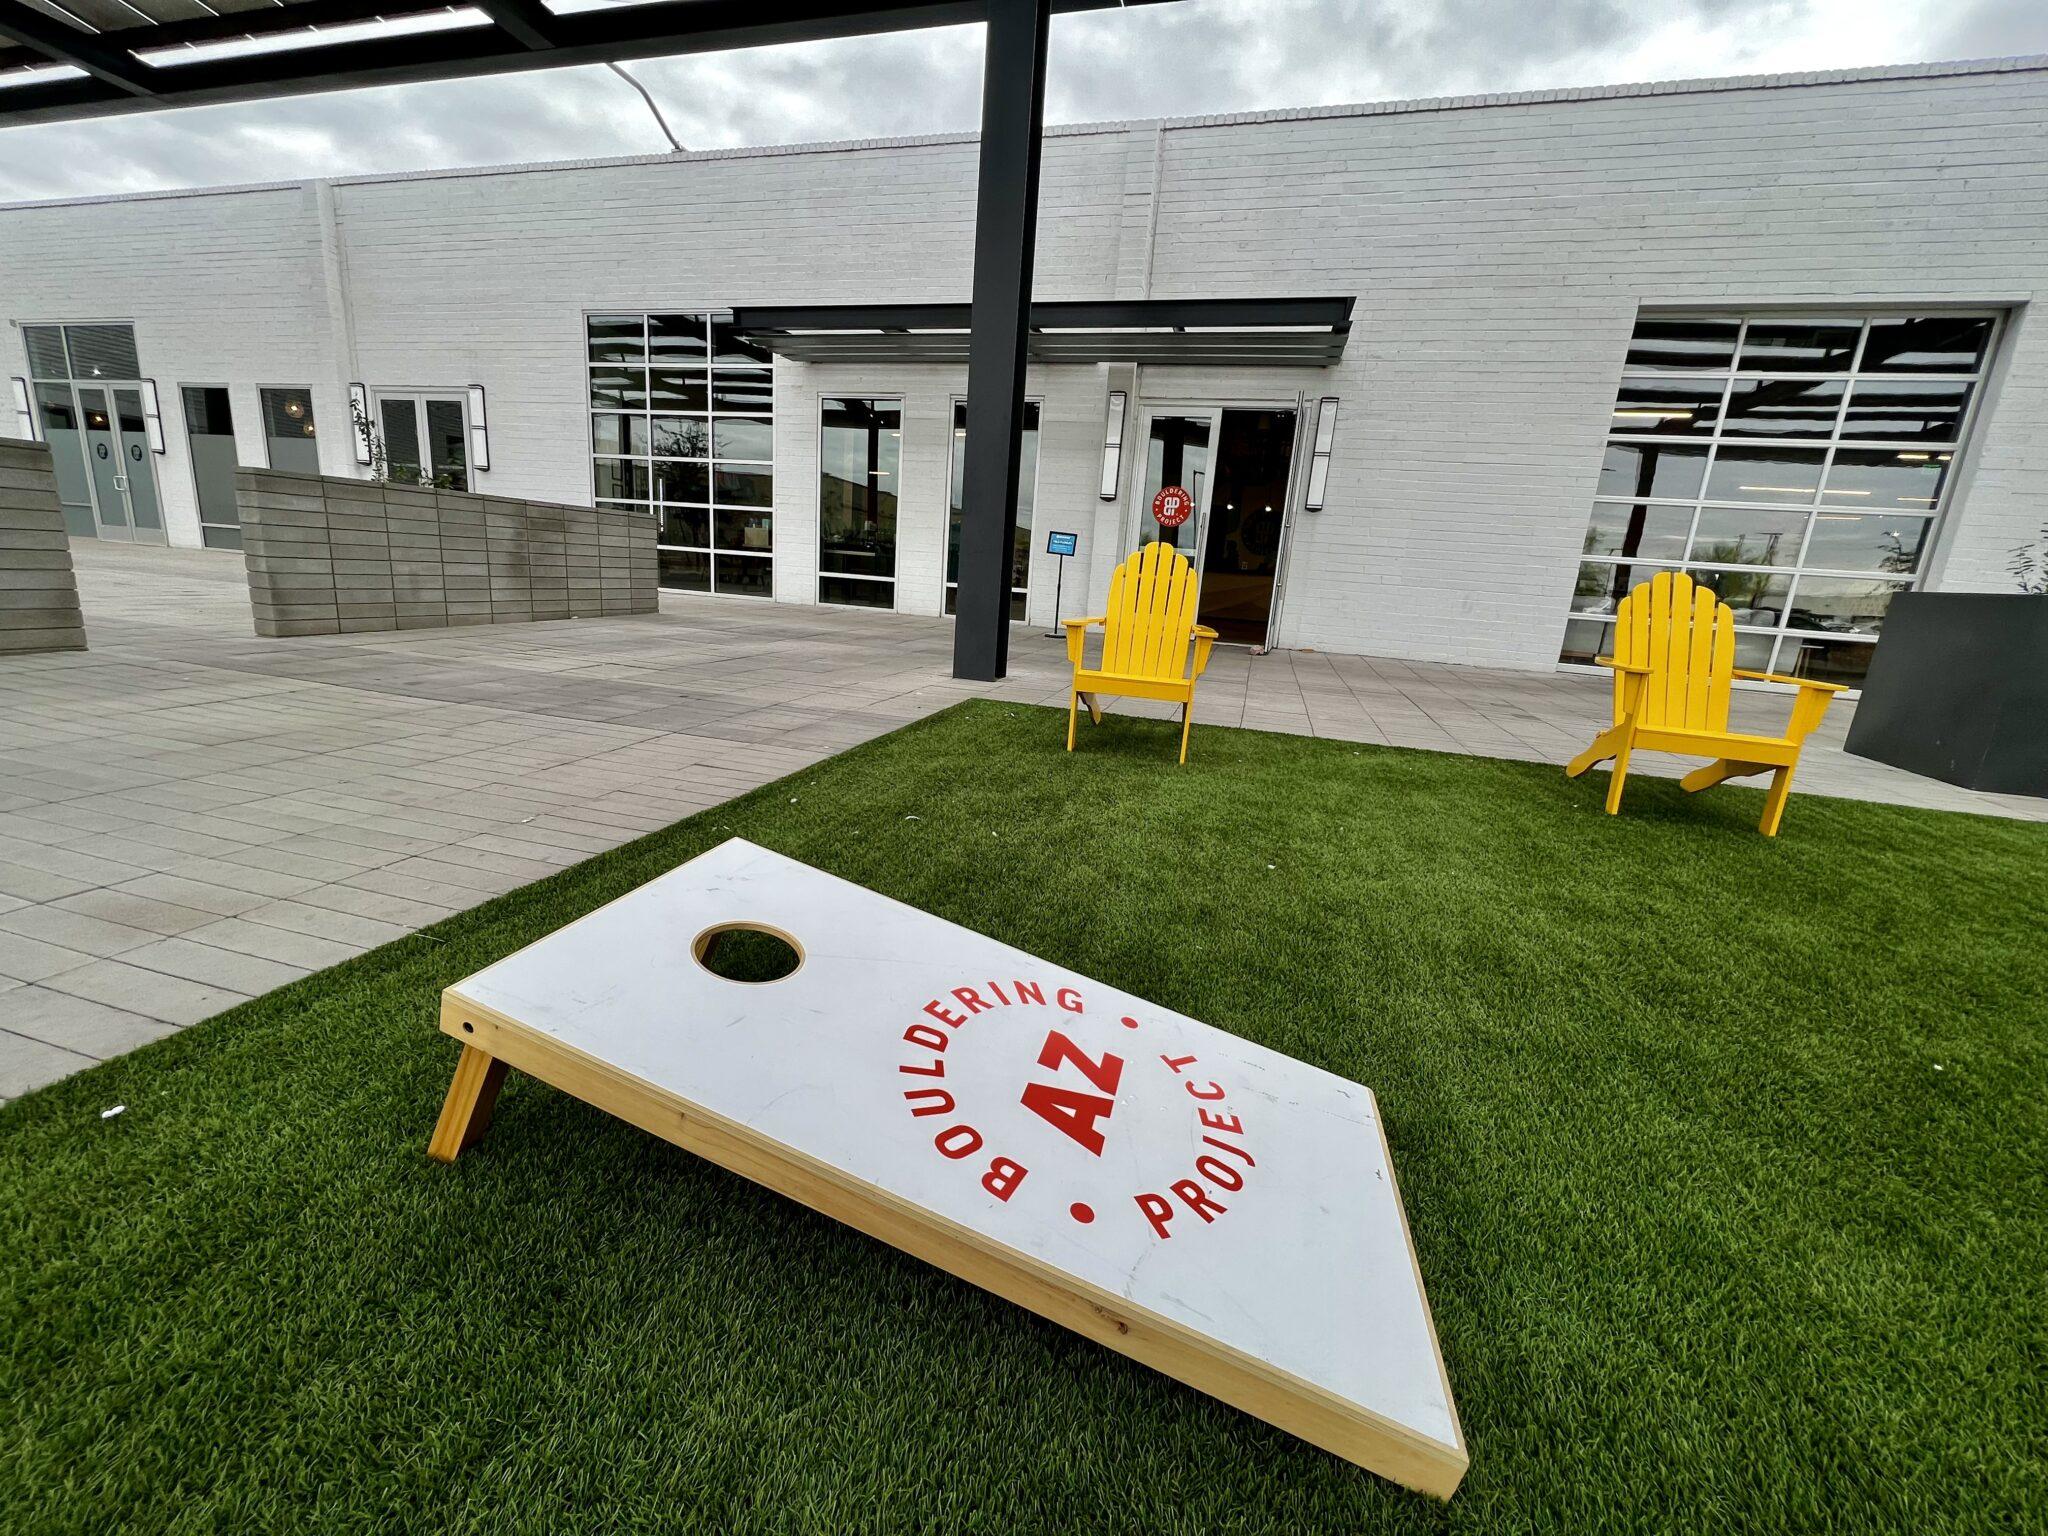 Cornhole on lawn with yellow chairs in background